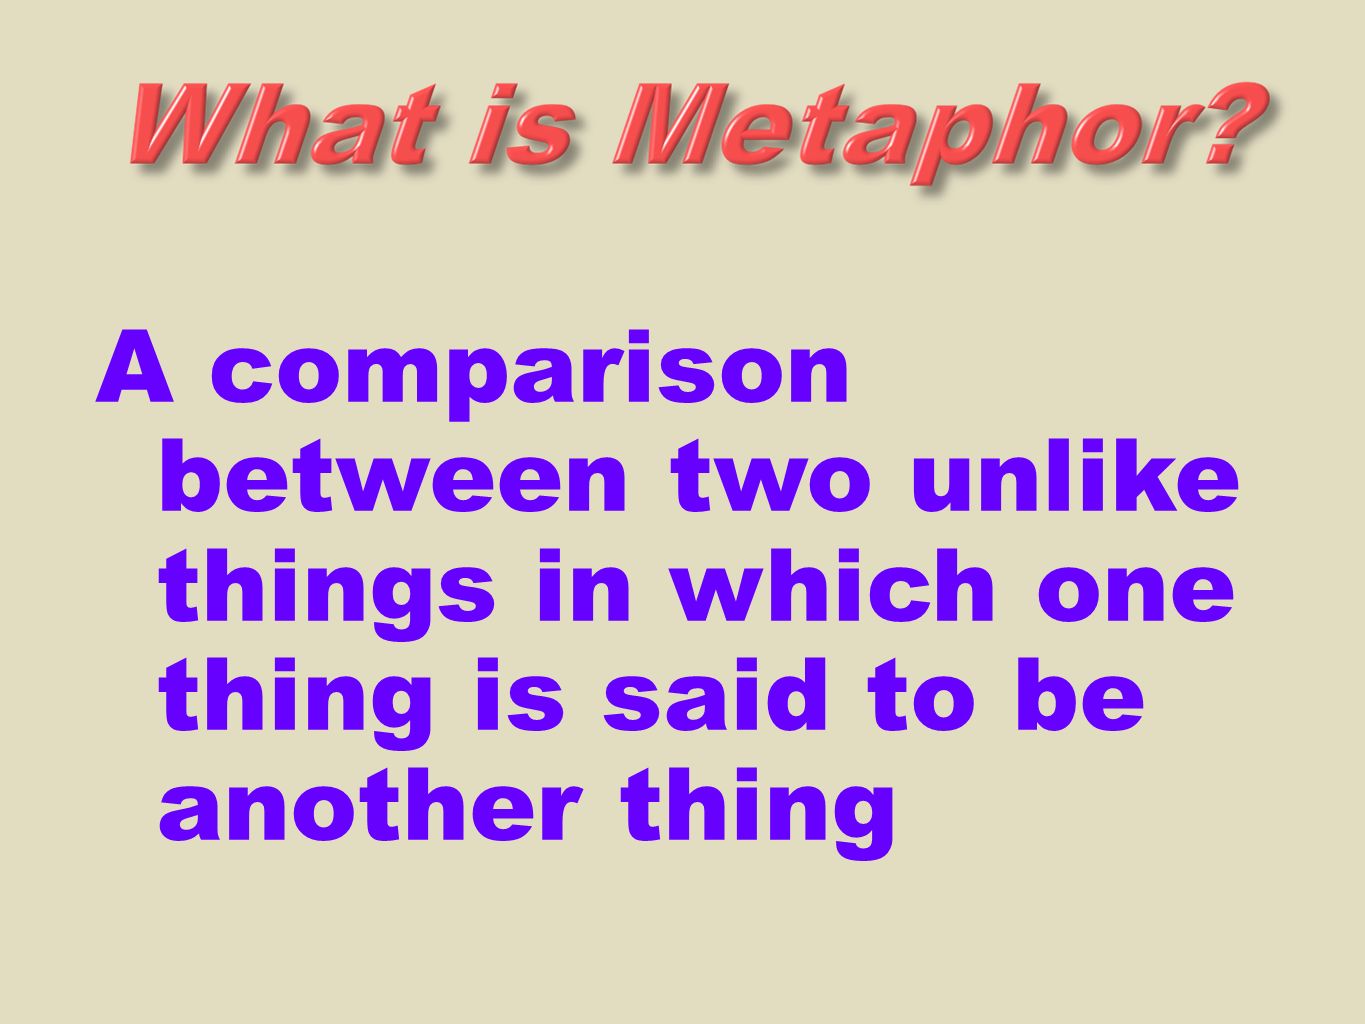 A comparison between two unlike things in which one thing is said to be another thing